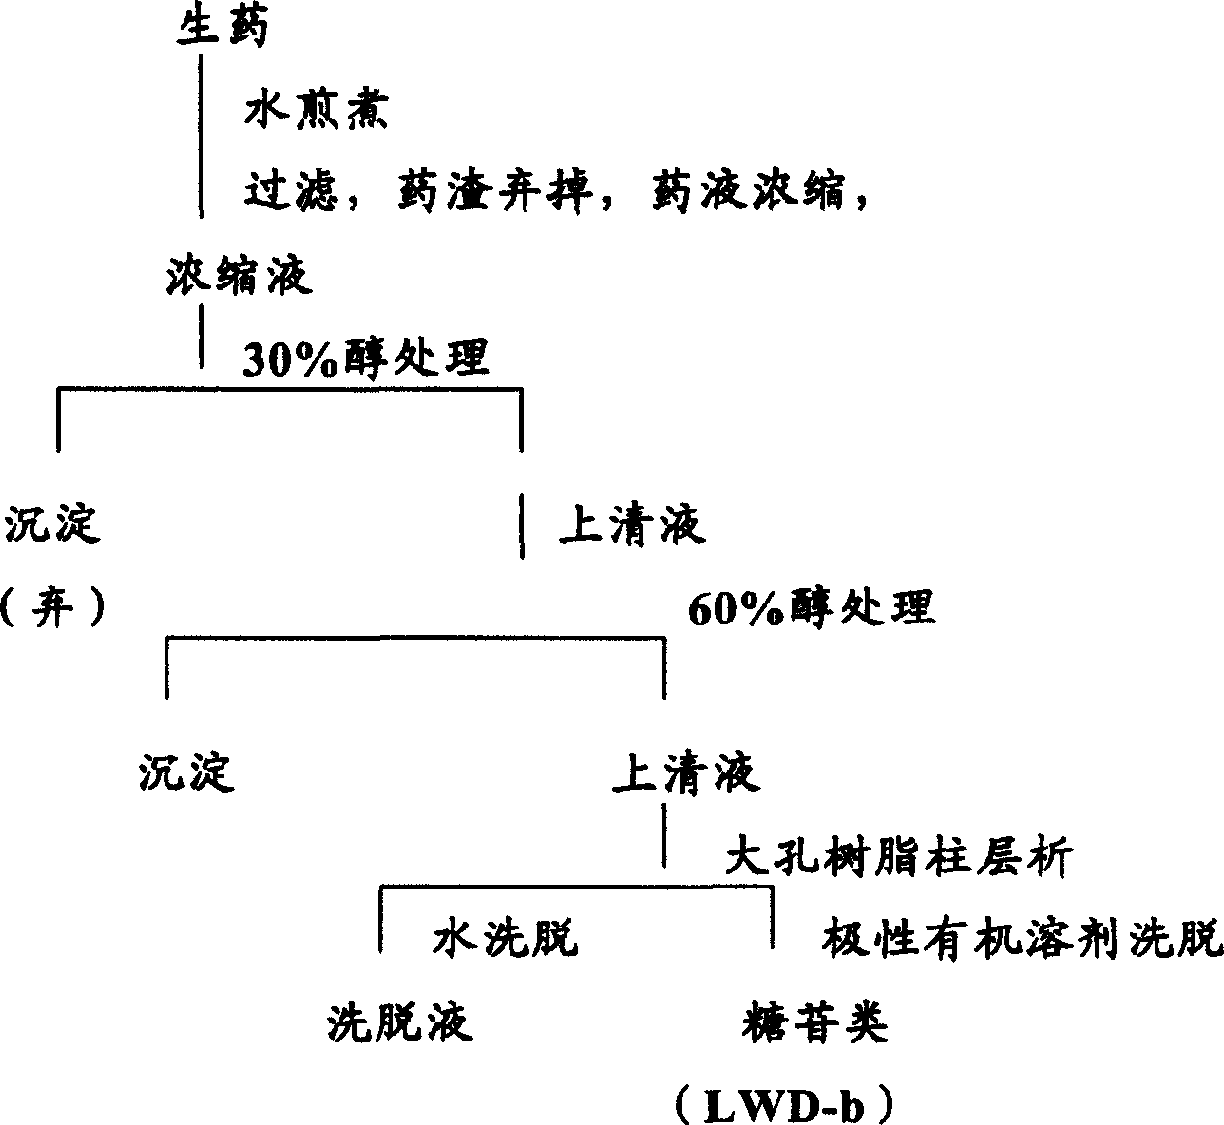 Glucoside active site LWD-b in Liuwei Dihuang decoction, its preparation and medical usage